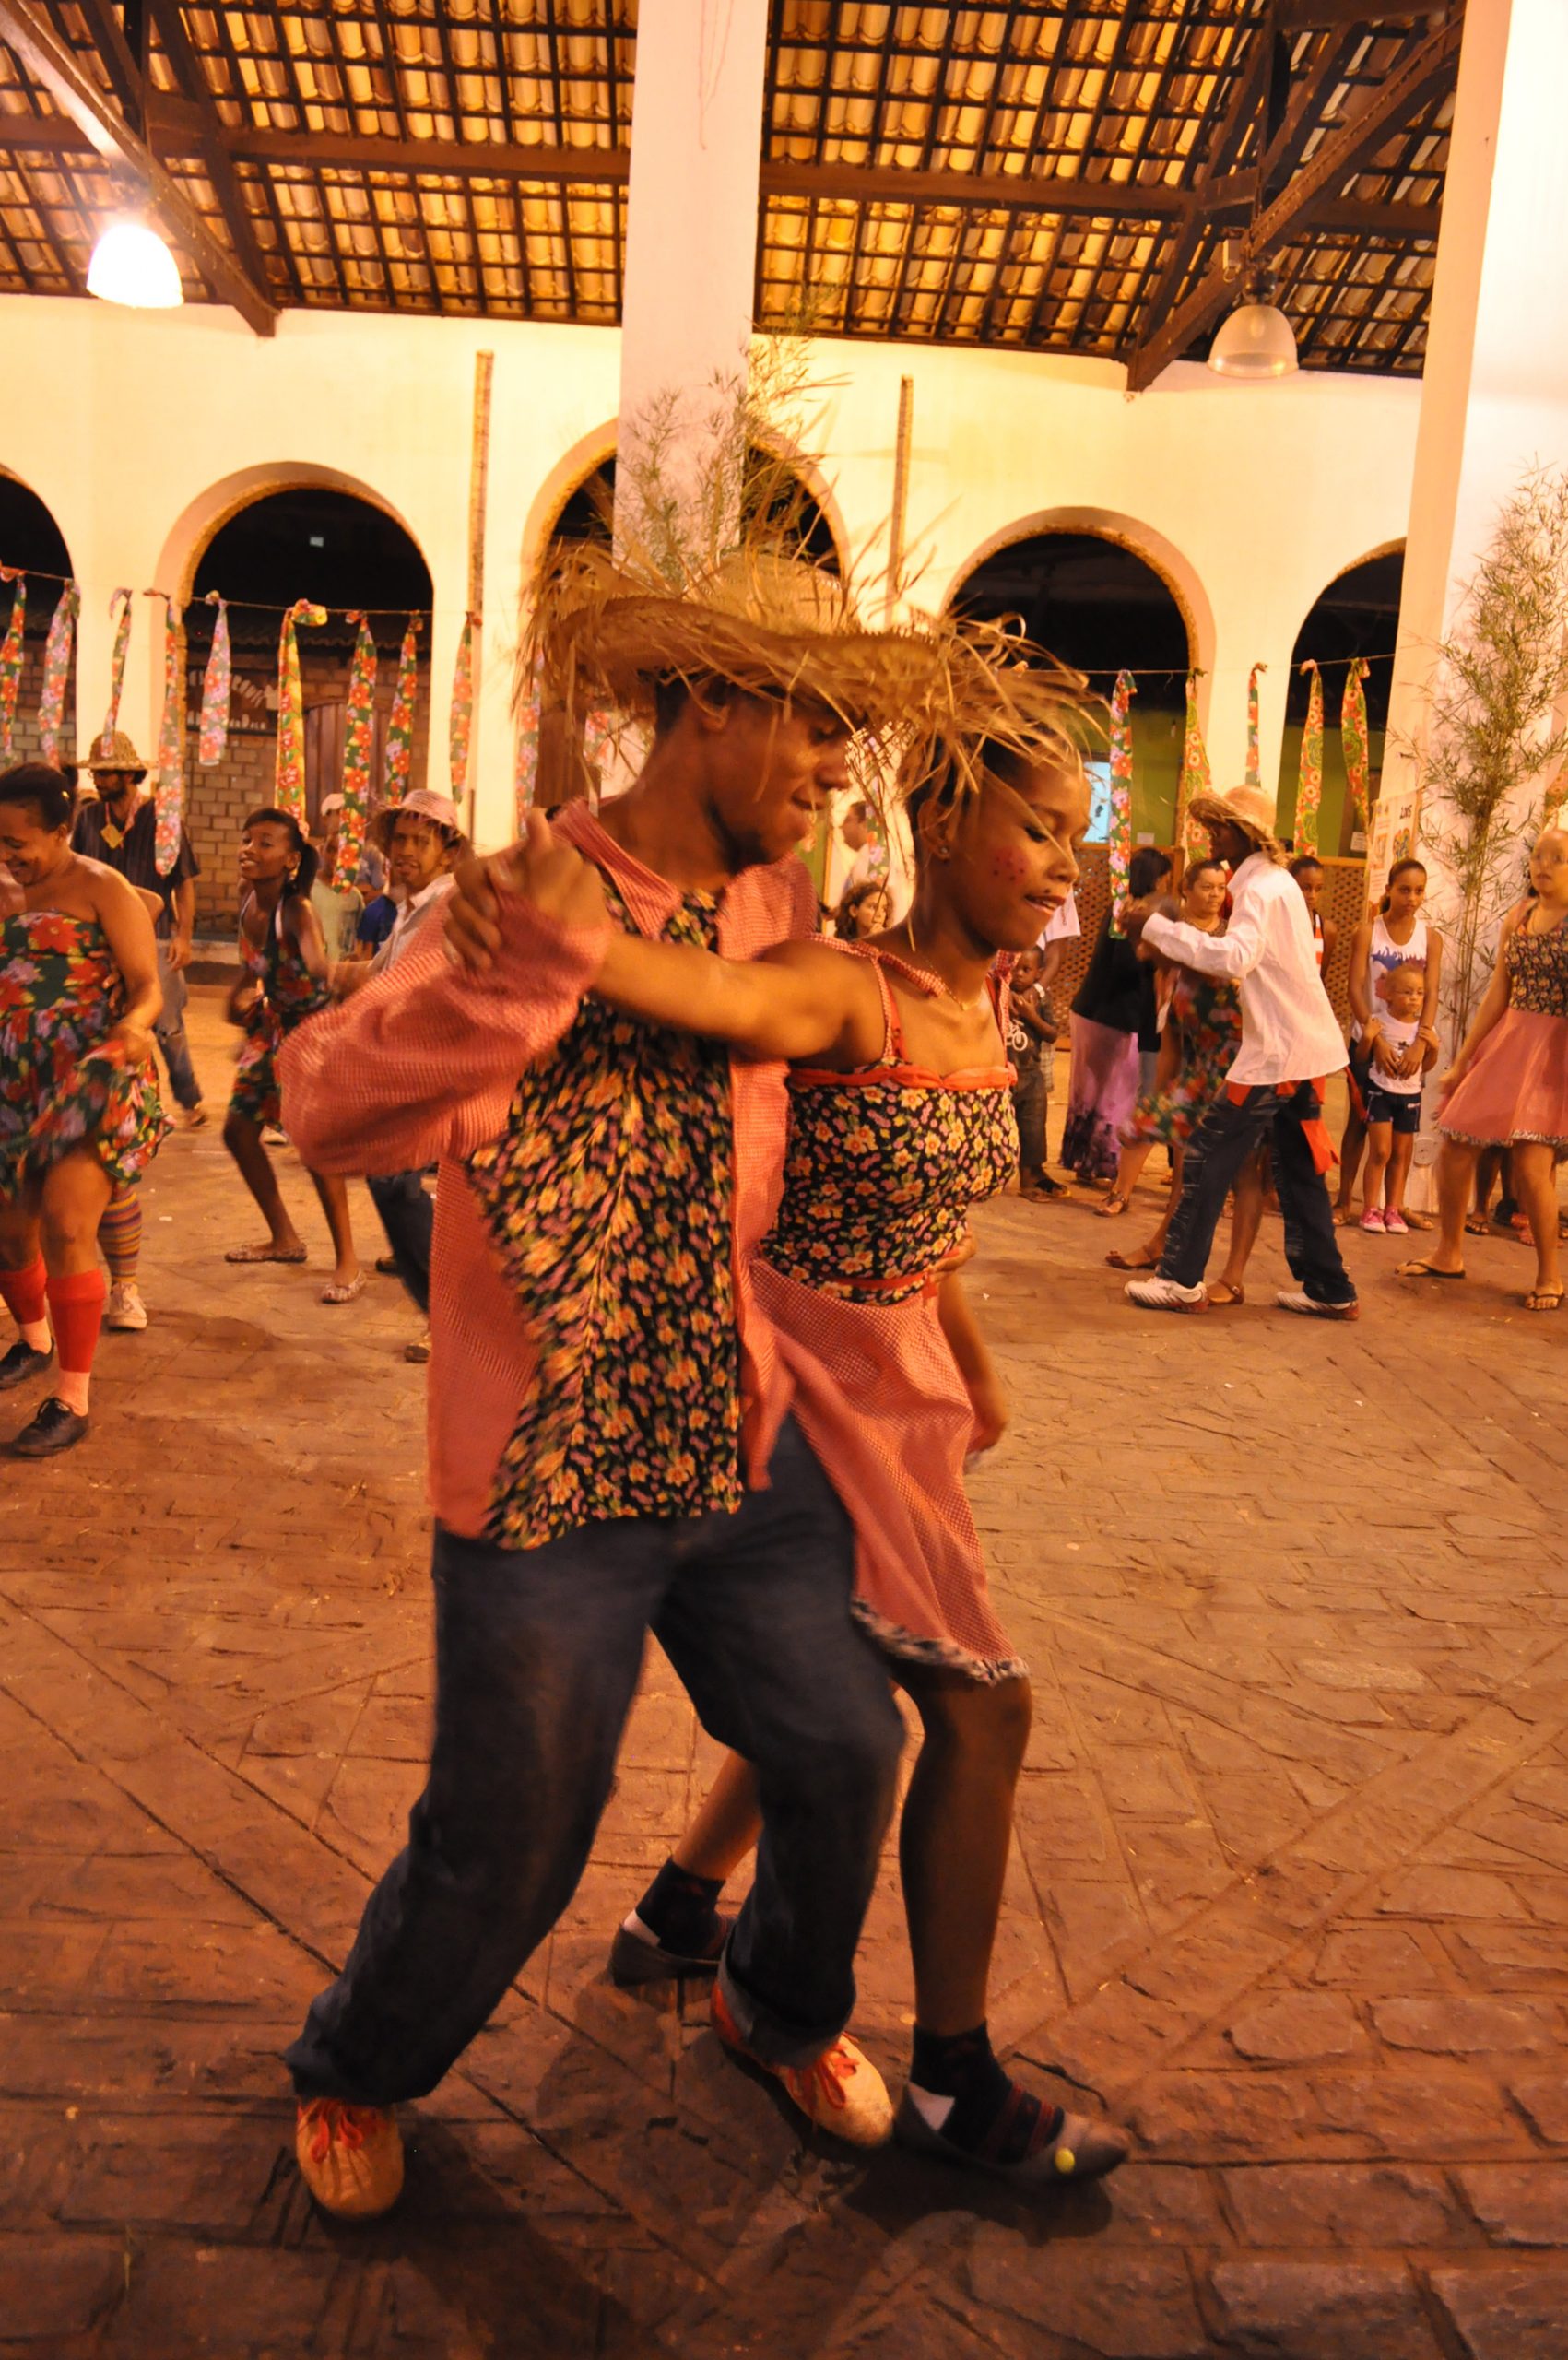 A young man and woman dance, the man wearing a straw hat, at night under bright lights.